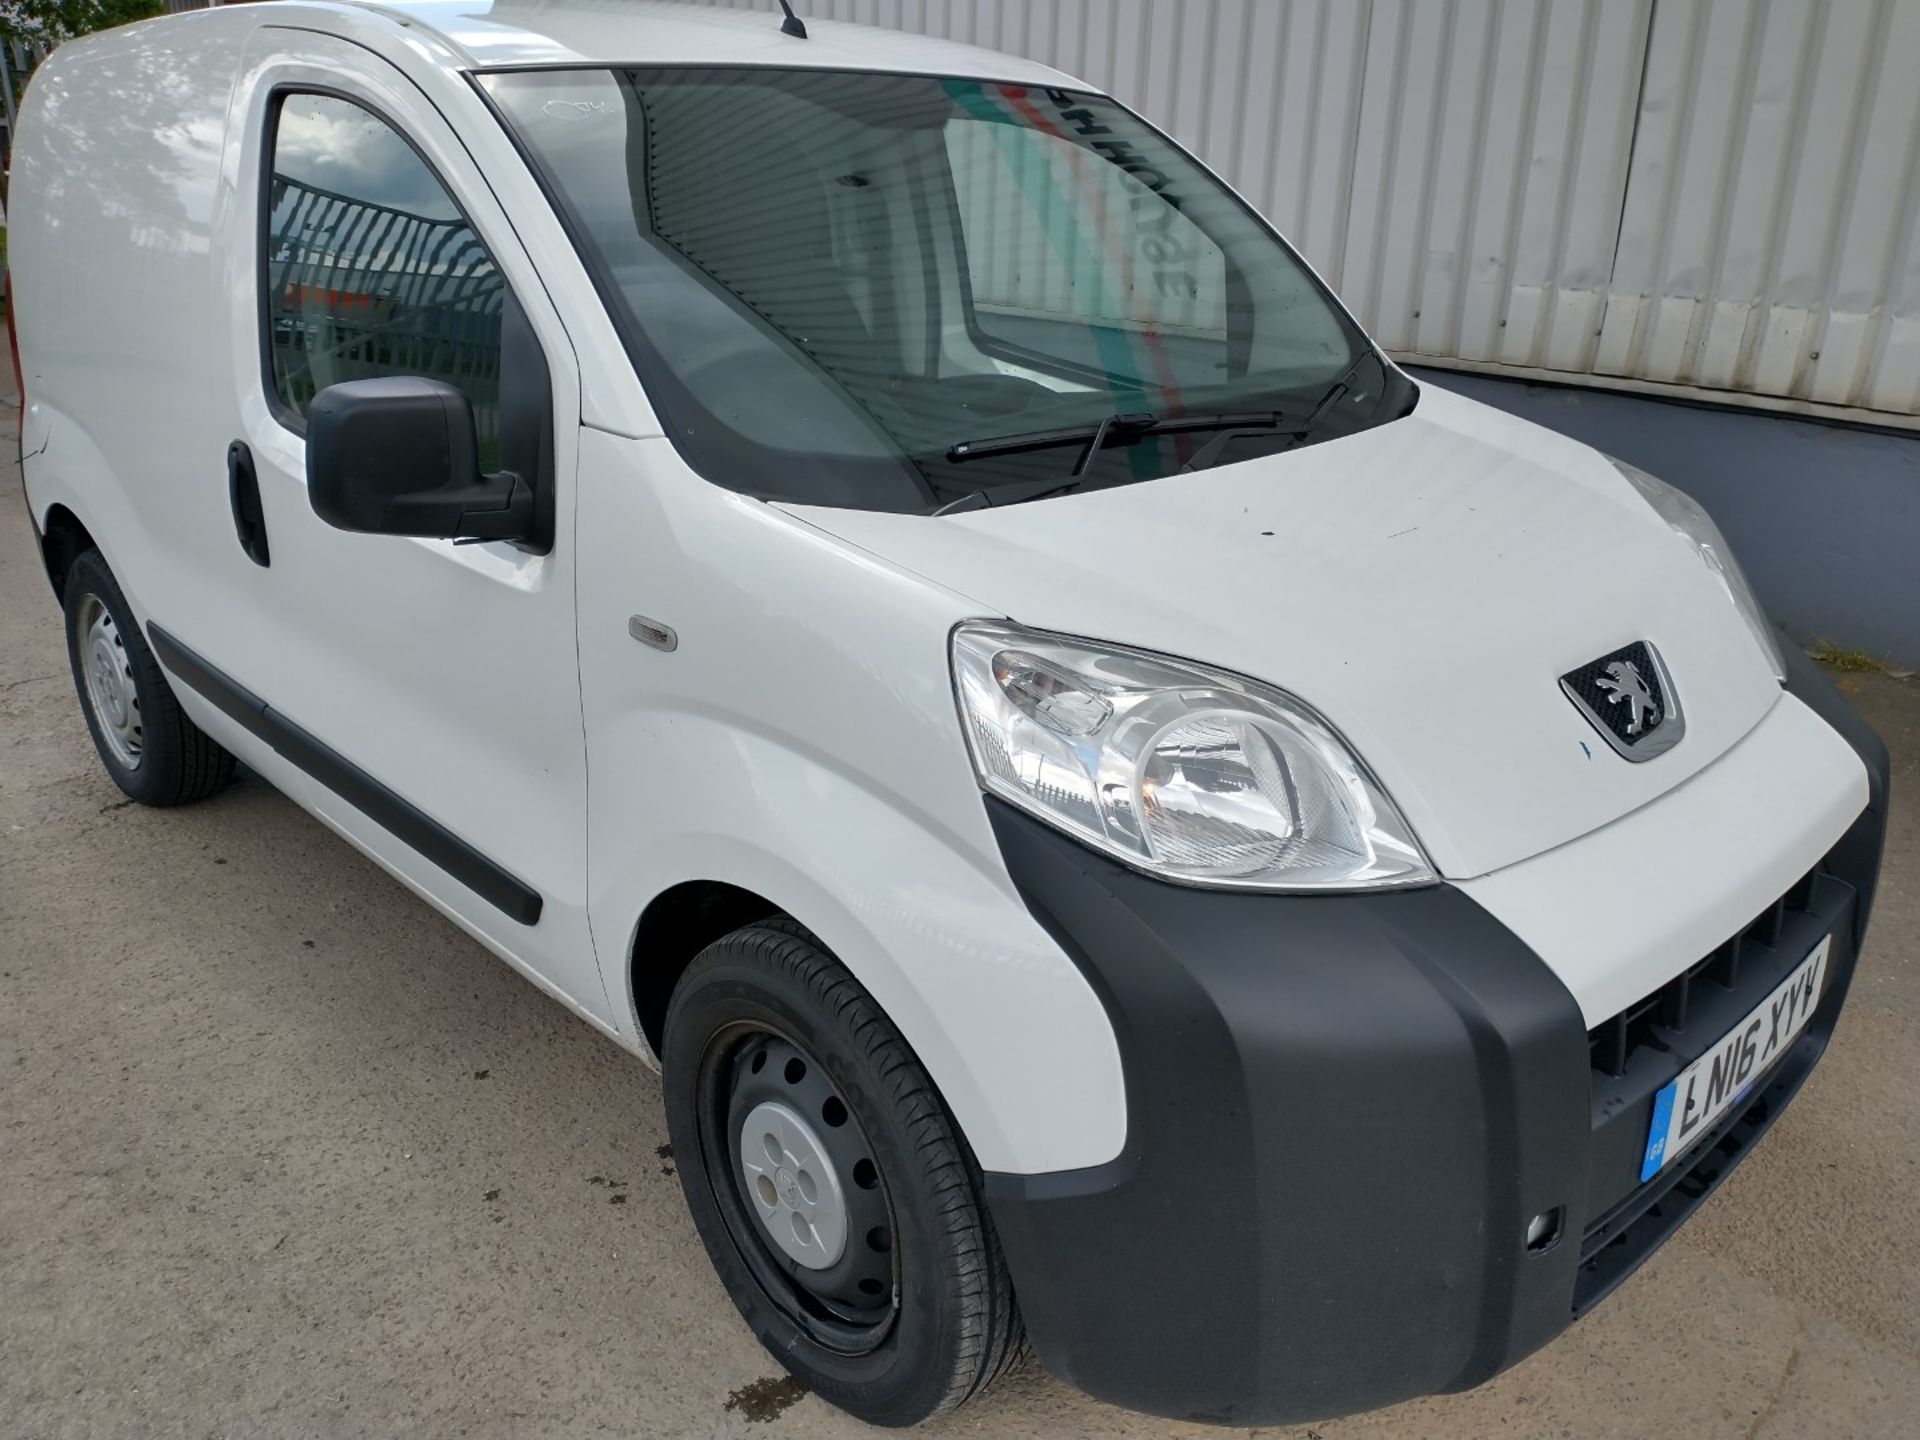 2016 Peugeot Bipper S Hdi Panel van - CL505 - Location: Corby - Image 9 of 15